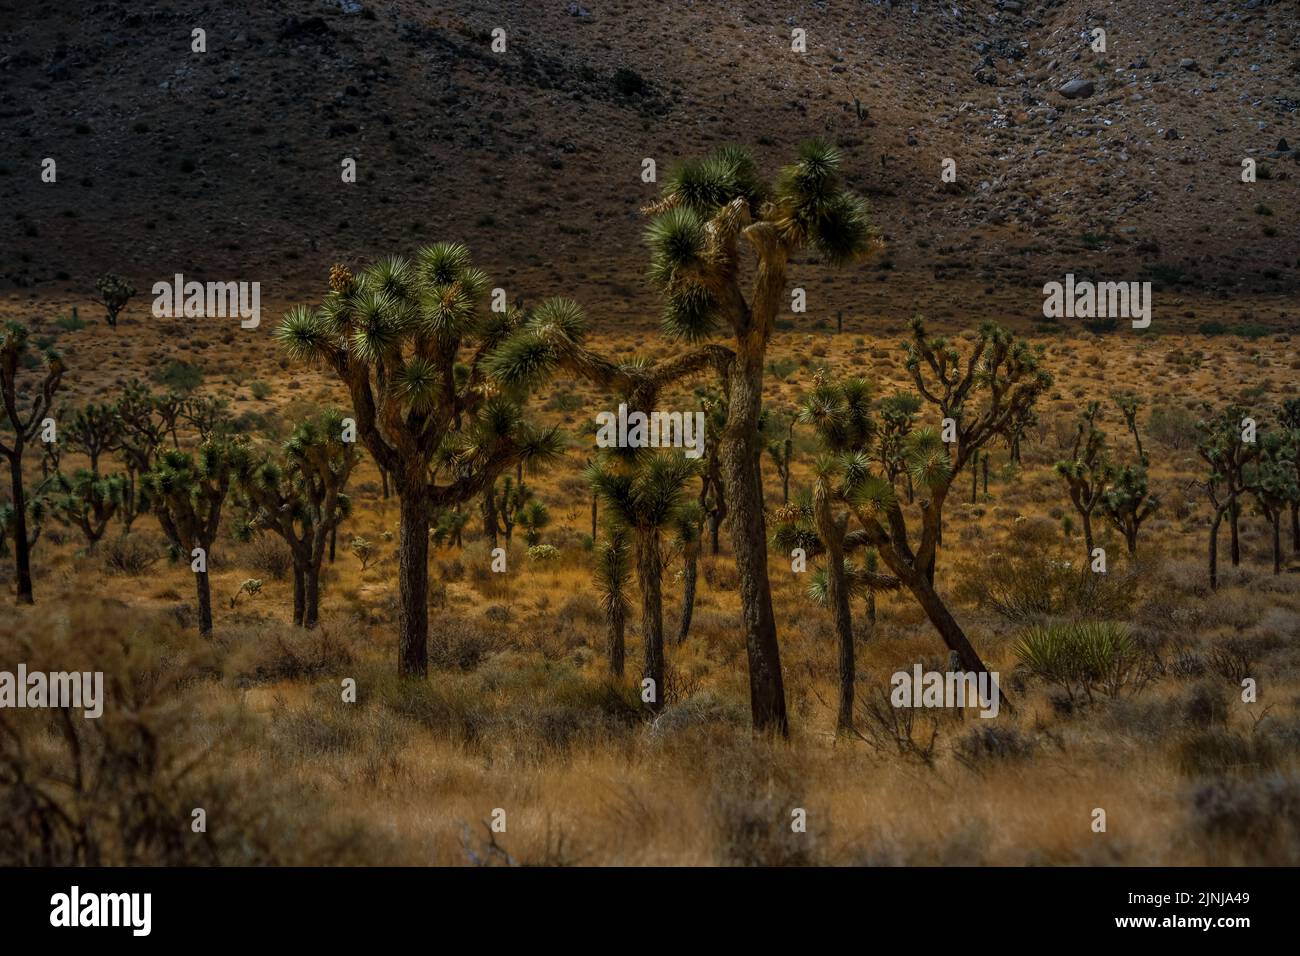 A closeup of small Joshua trees at the National Park in Southeastern California Stock Photo